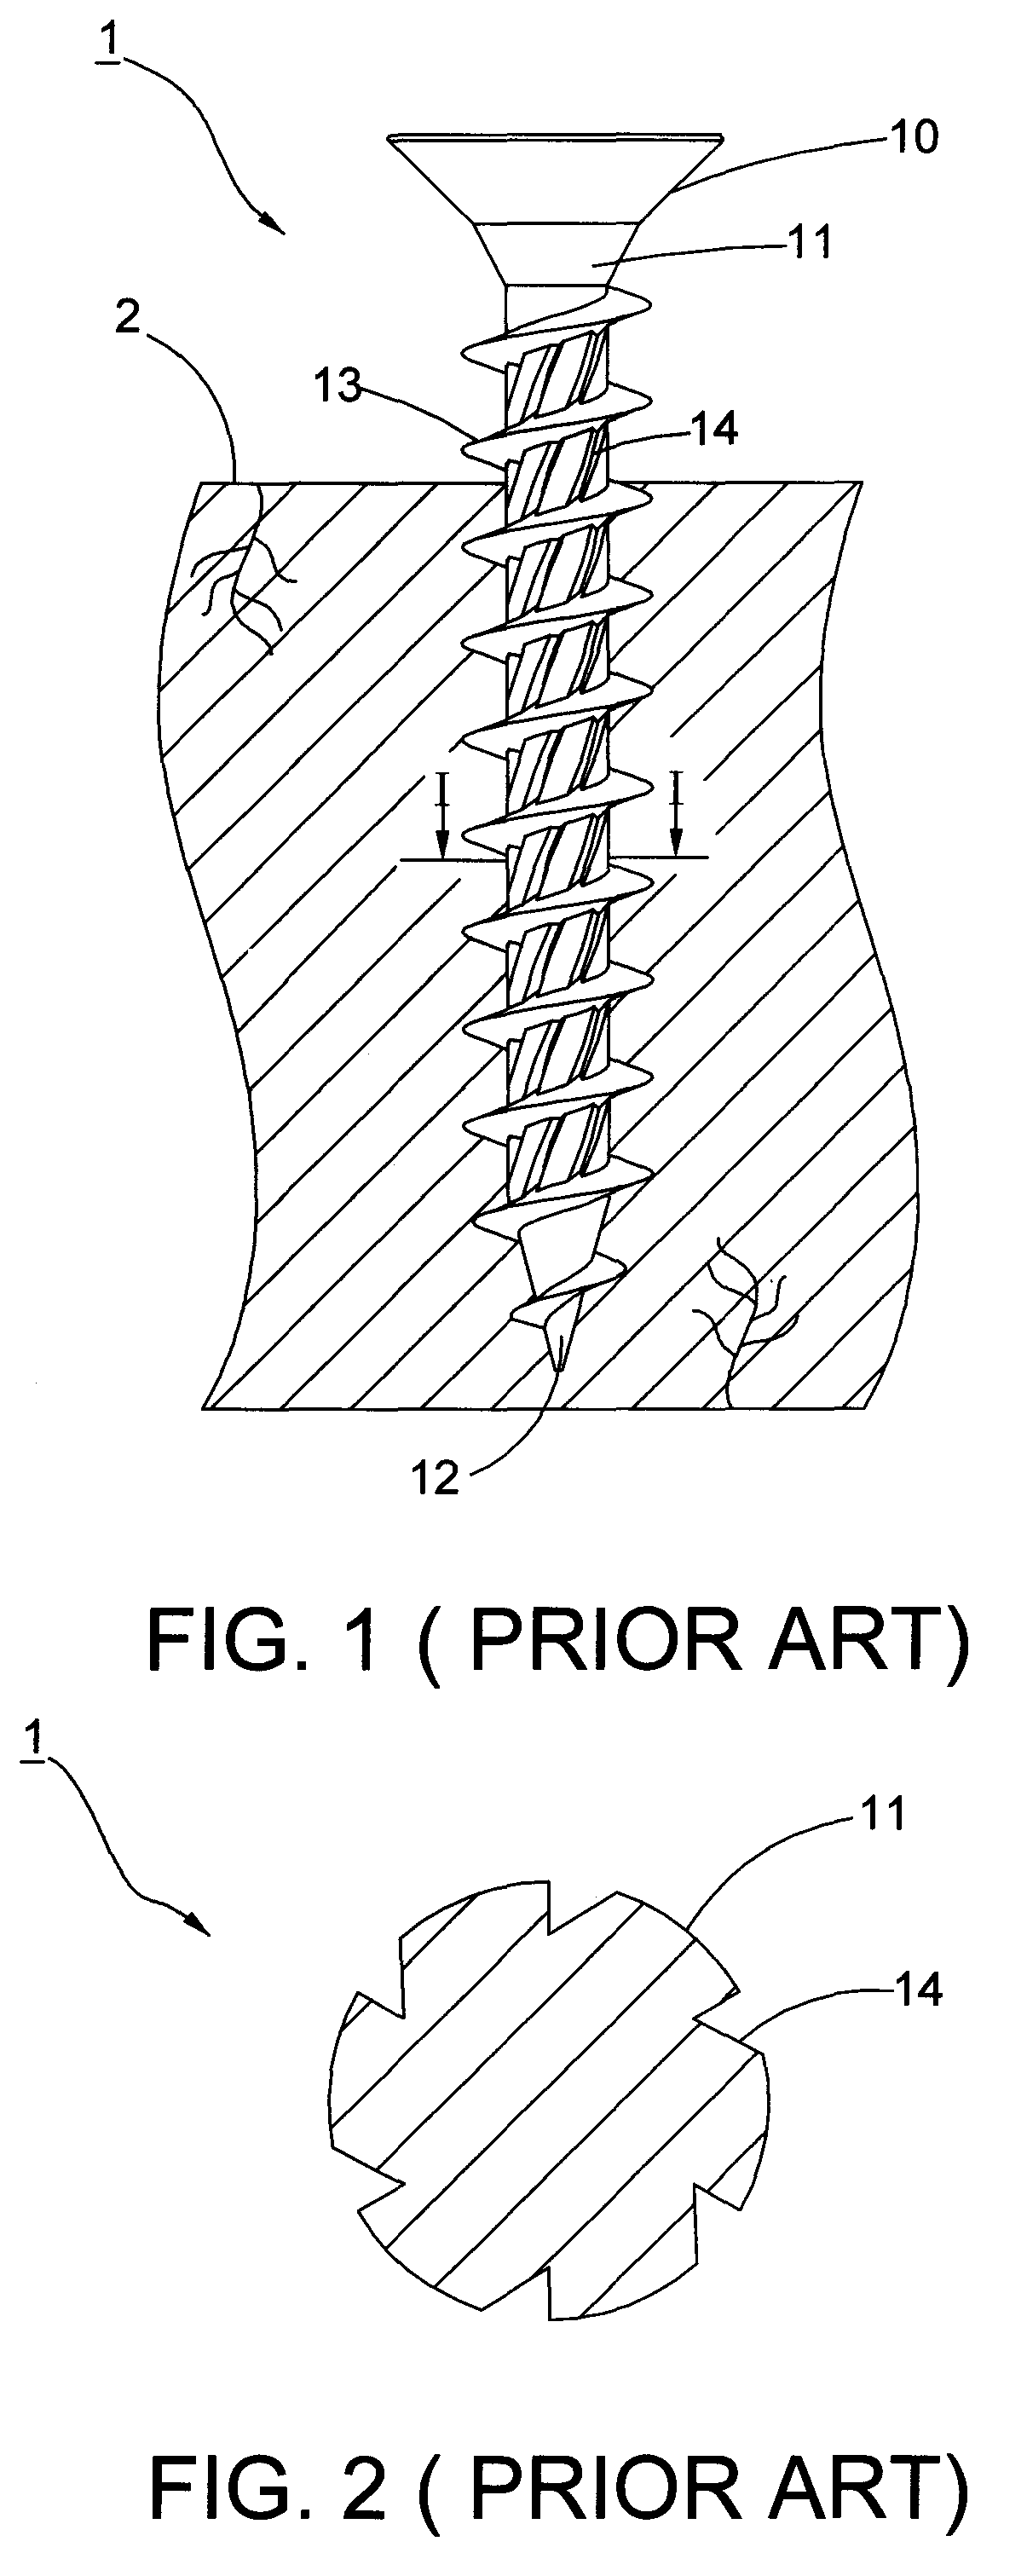 Screw for use in nonmetal objects